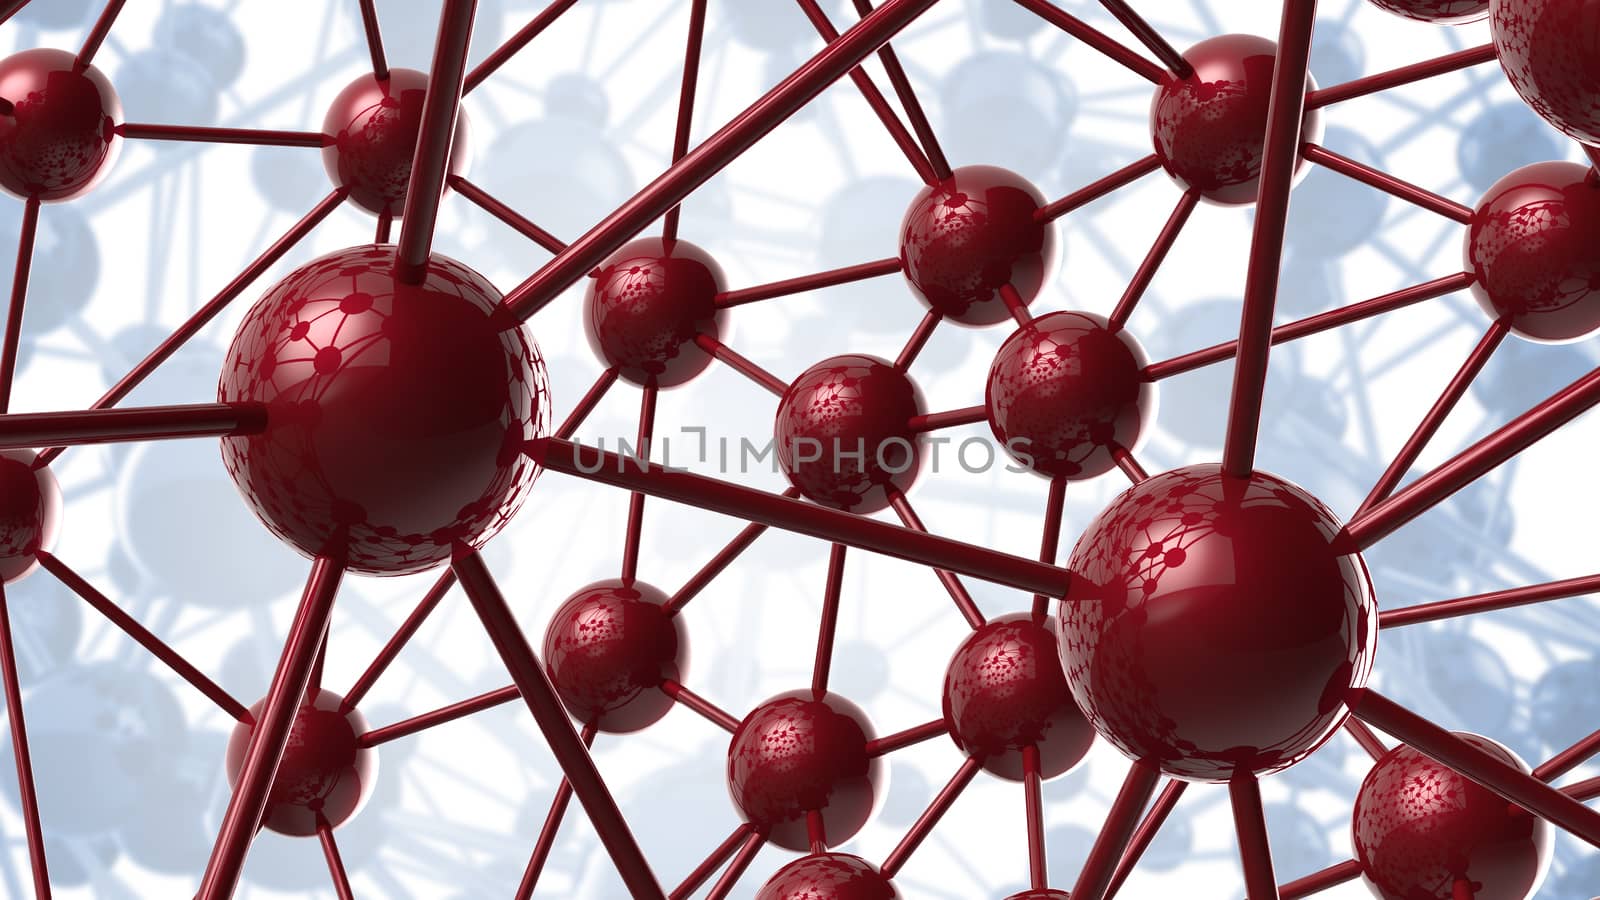 blue and red Molecular geometric chaos abstract structure. Science technology network connection hi-tech background 3d rendering illustration by skrotov